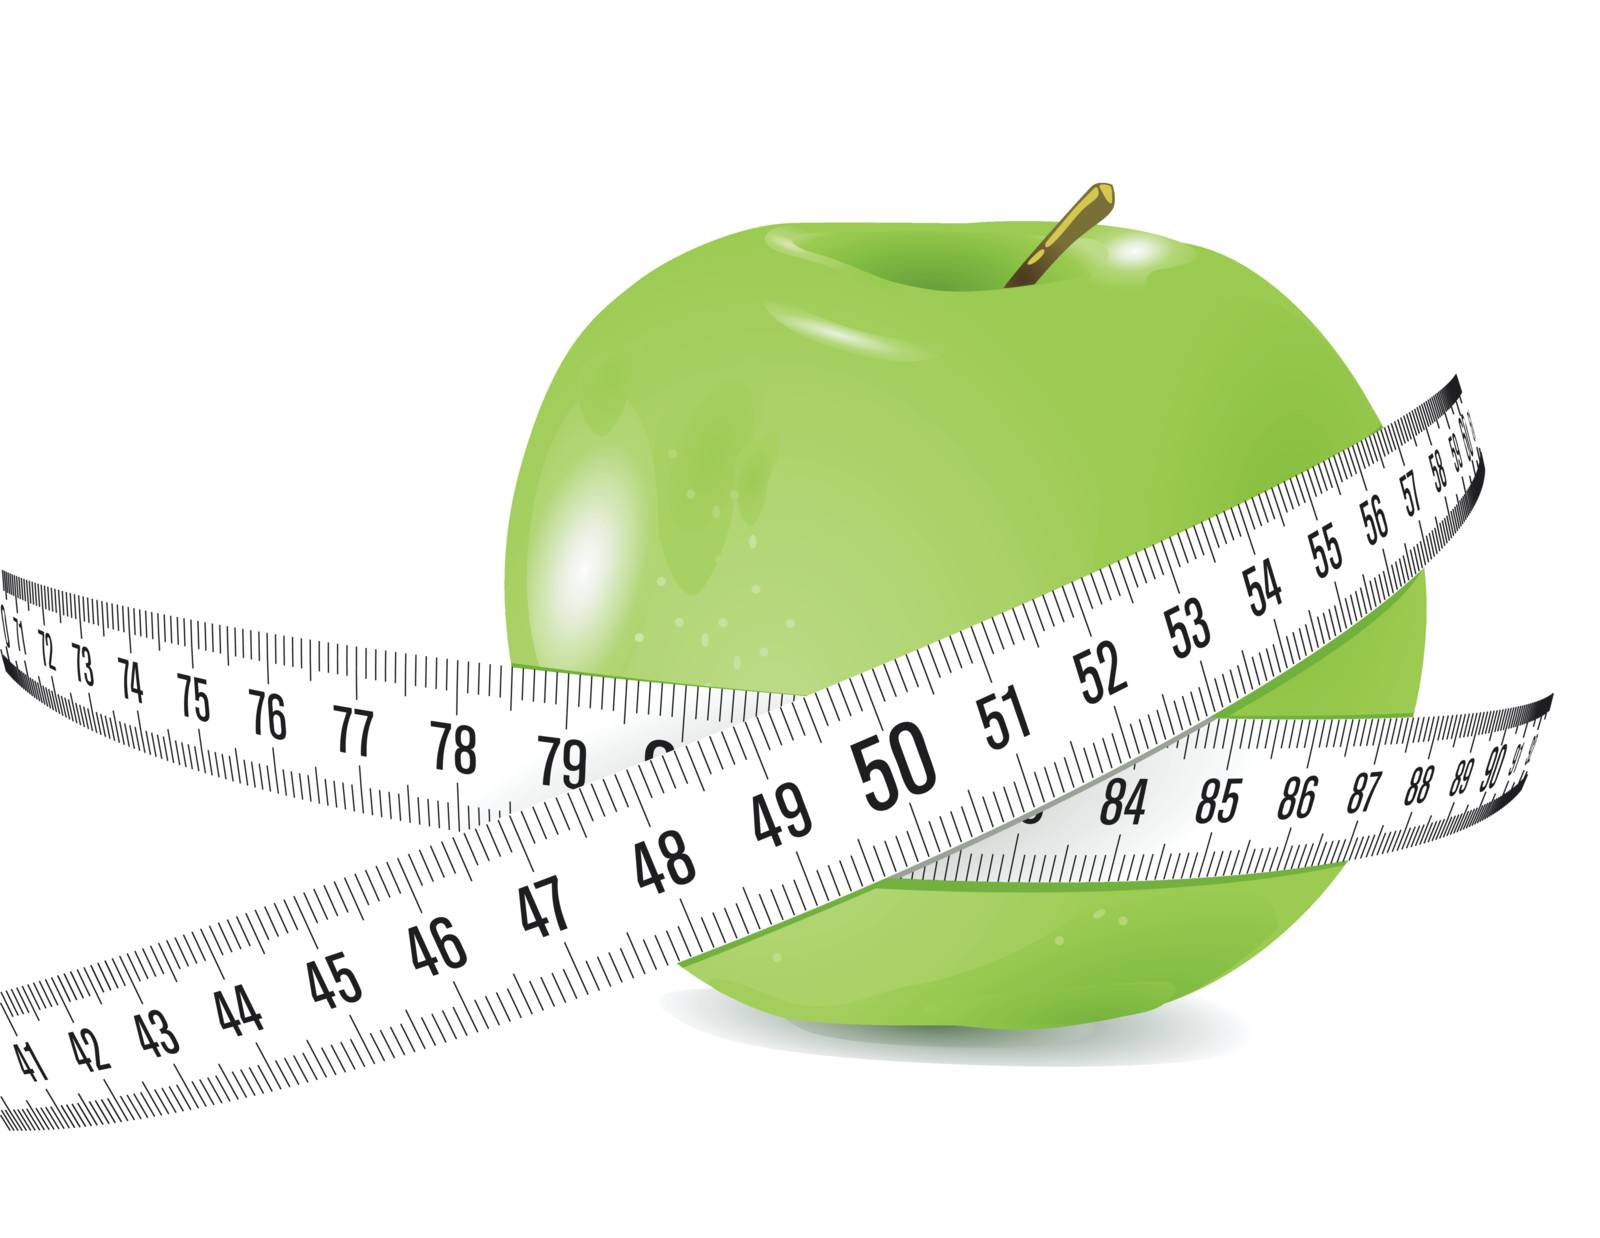 fresh apple with measuring tape by scusi